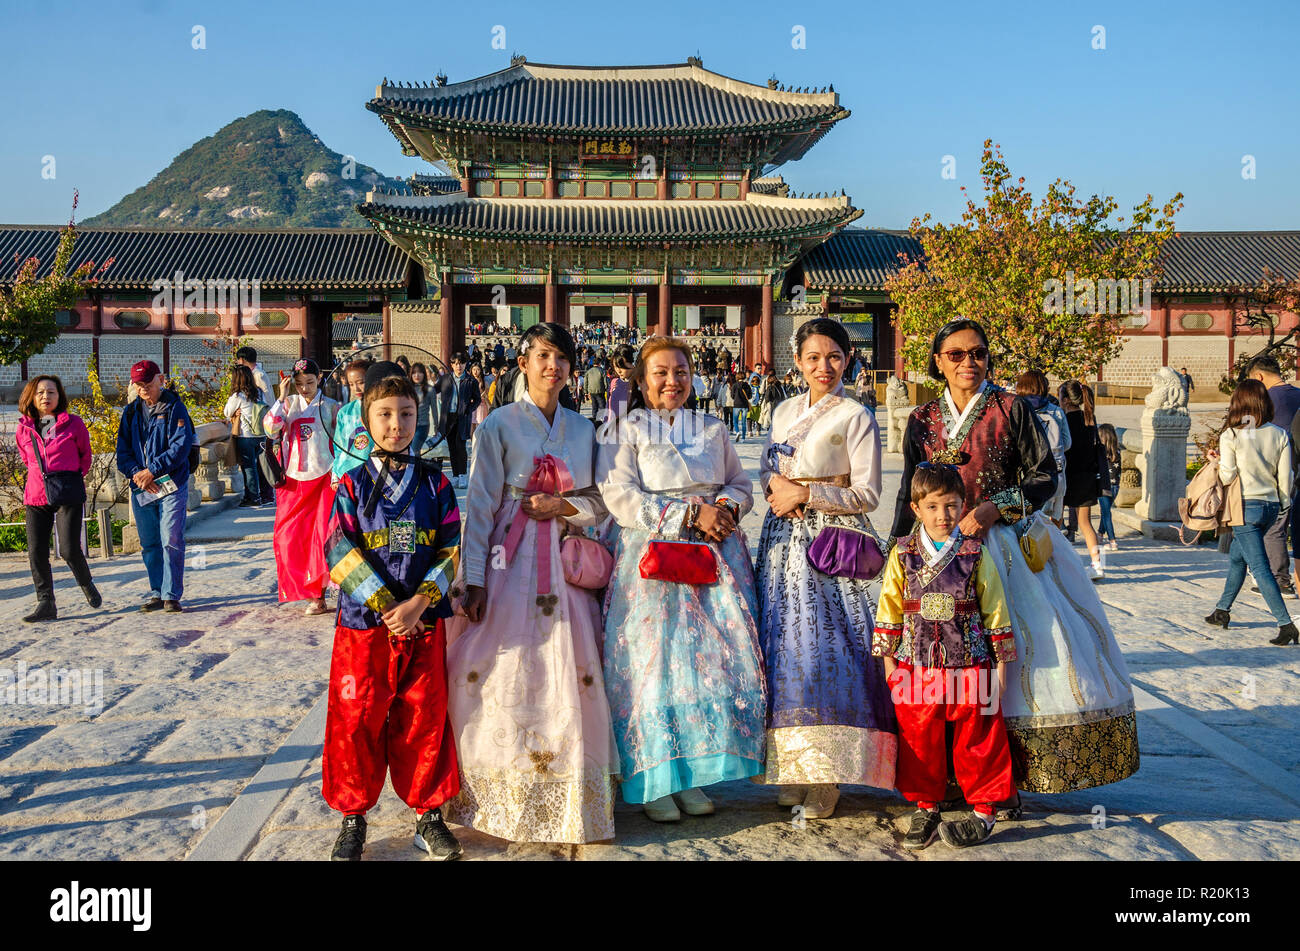 Group of friends pose for a picture at Gyeongbokgung Palace in Seoul, dressed in traditional Korean dress, the hanbok. Stock Photo